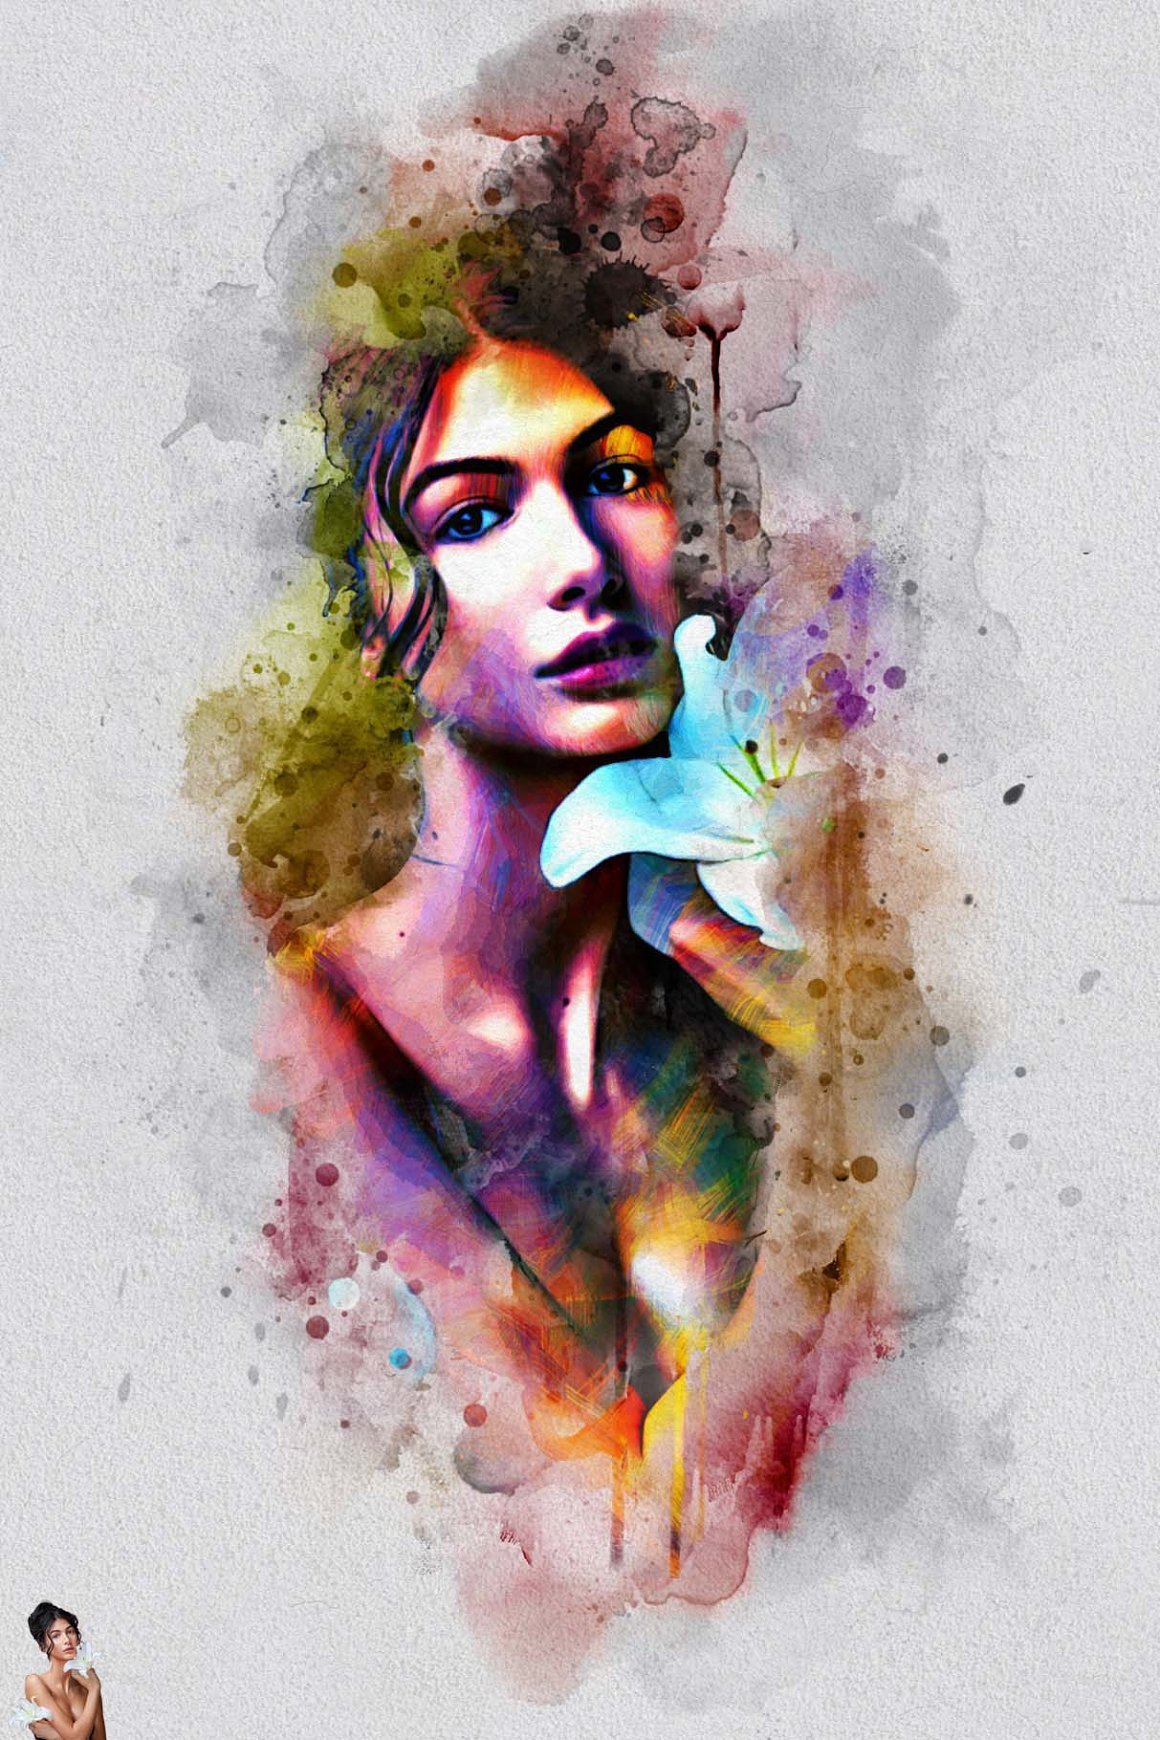 Photoshop Watercolor Painting Effect - Design Cuts